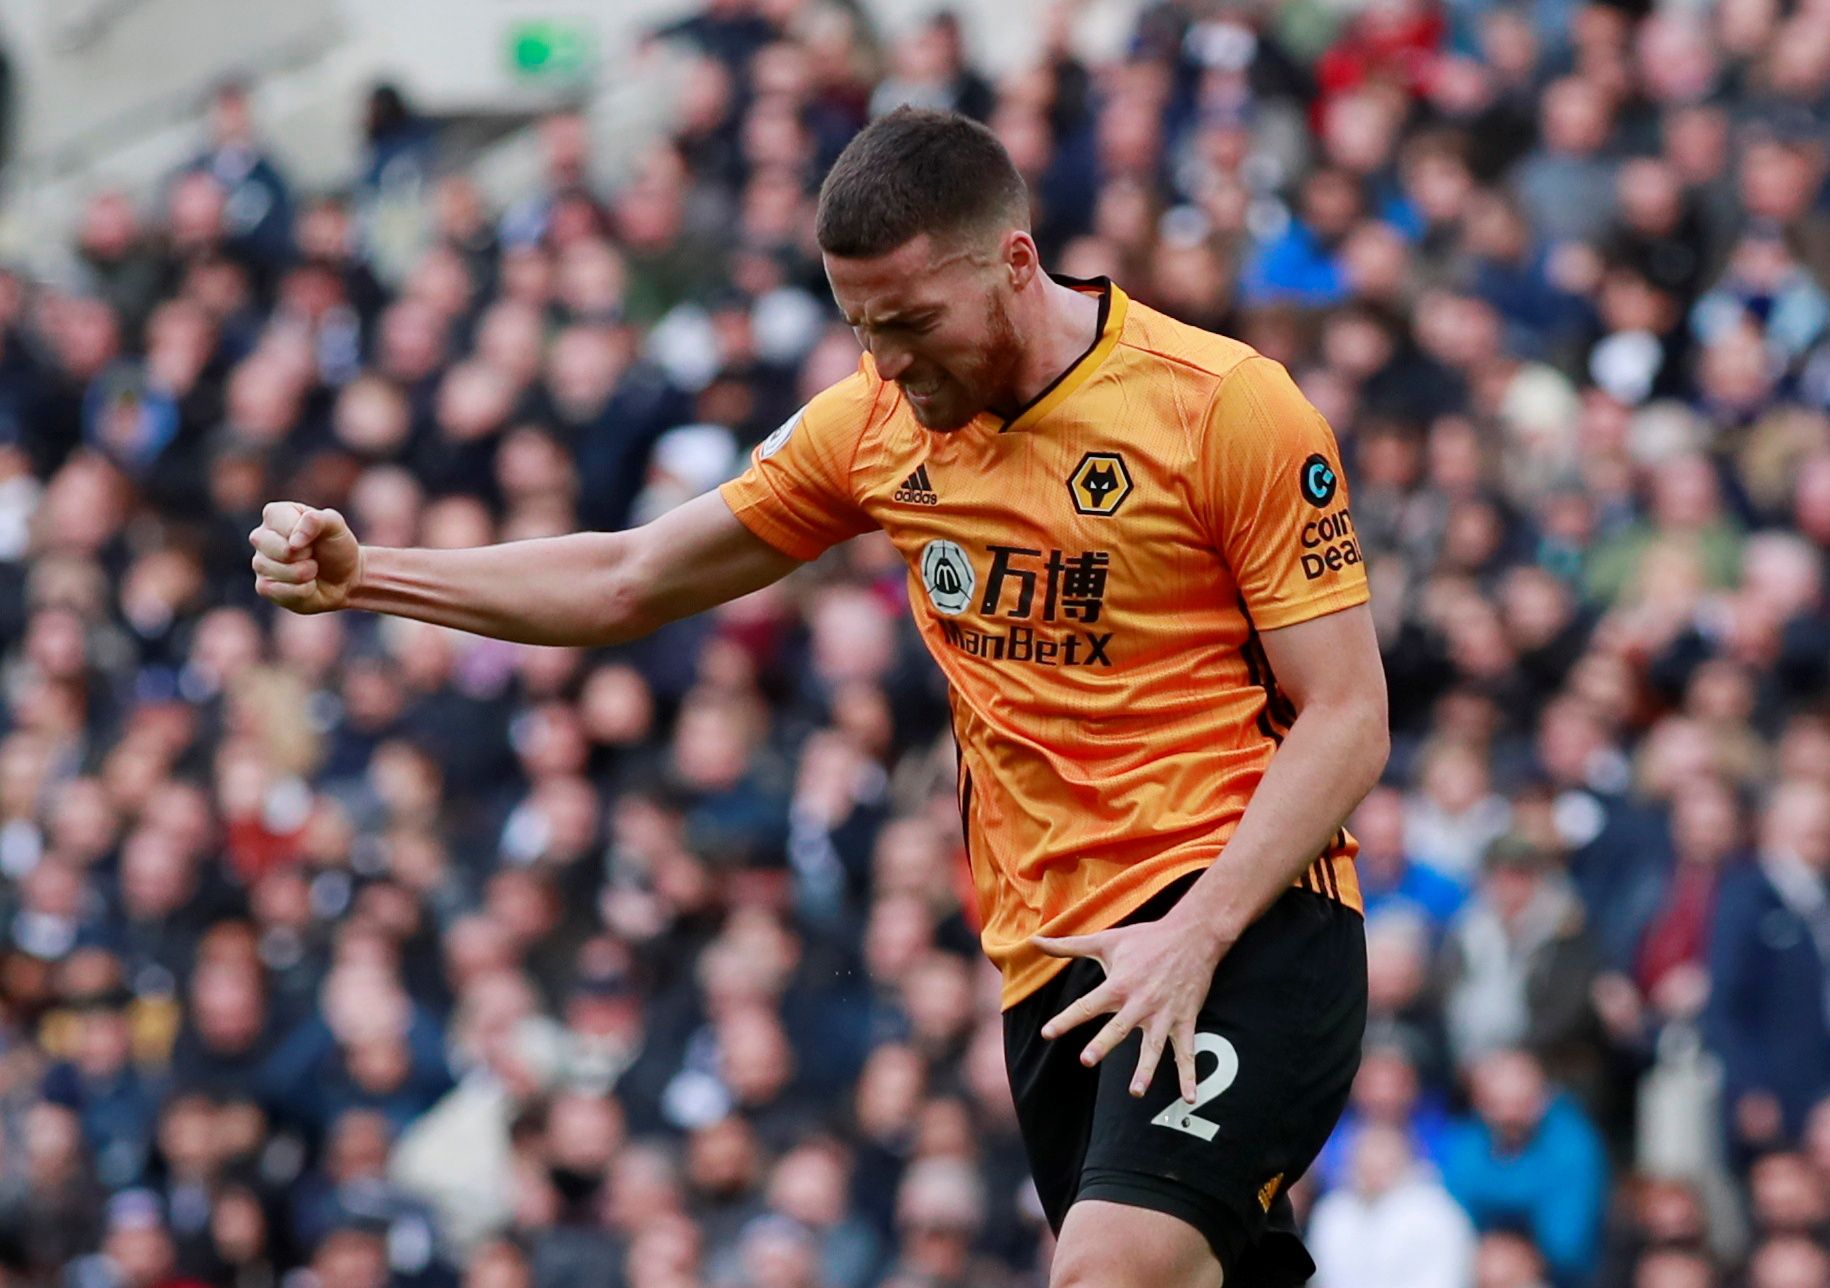 Soccer Football - Premier League - Tottenham Hotspur v Wolverhampton Wanderers - Tottenham Hotspur Stadium, London, Britain - March 1, 2020  Wolverhampton Wanderers' Matt Doherty celebrates scoring their first goal    Action Images via Reuters/Andrew Couldridge  EDITORIAL USE ONLY. No use with unauthorized audio, video, data, fixture lists, club/league logos or 